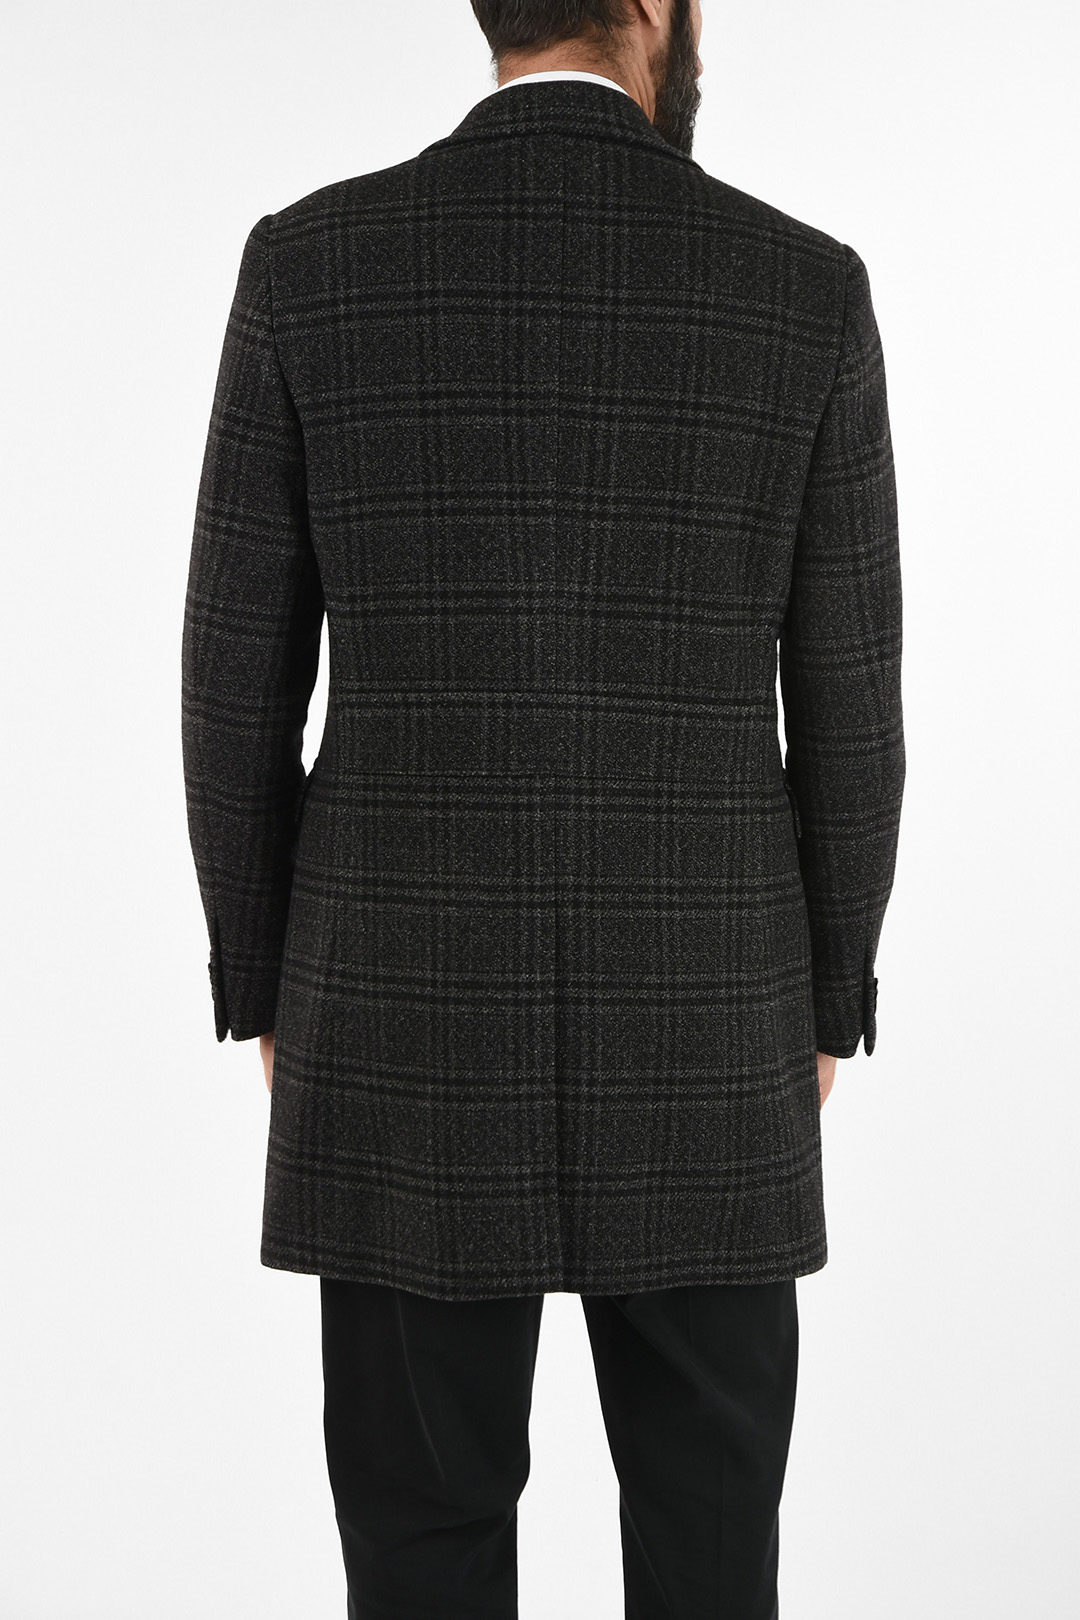 CC COLLECTION check three-quarter length 3-button double breasted  Chesterfield coat